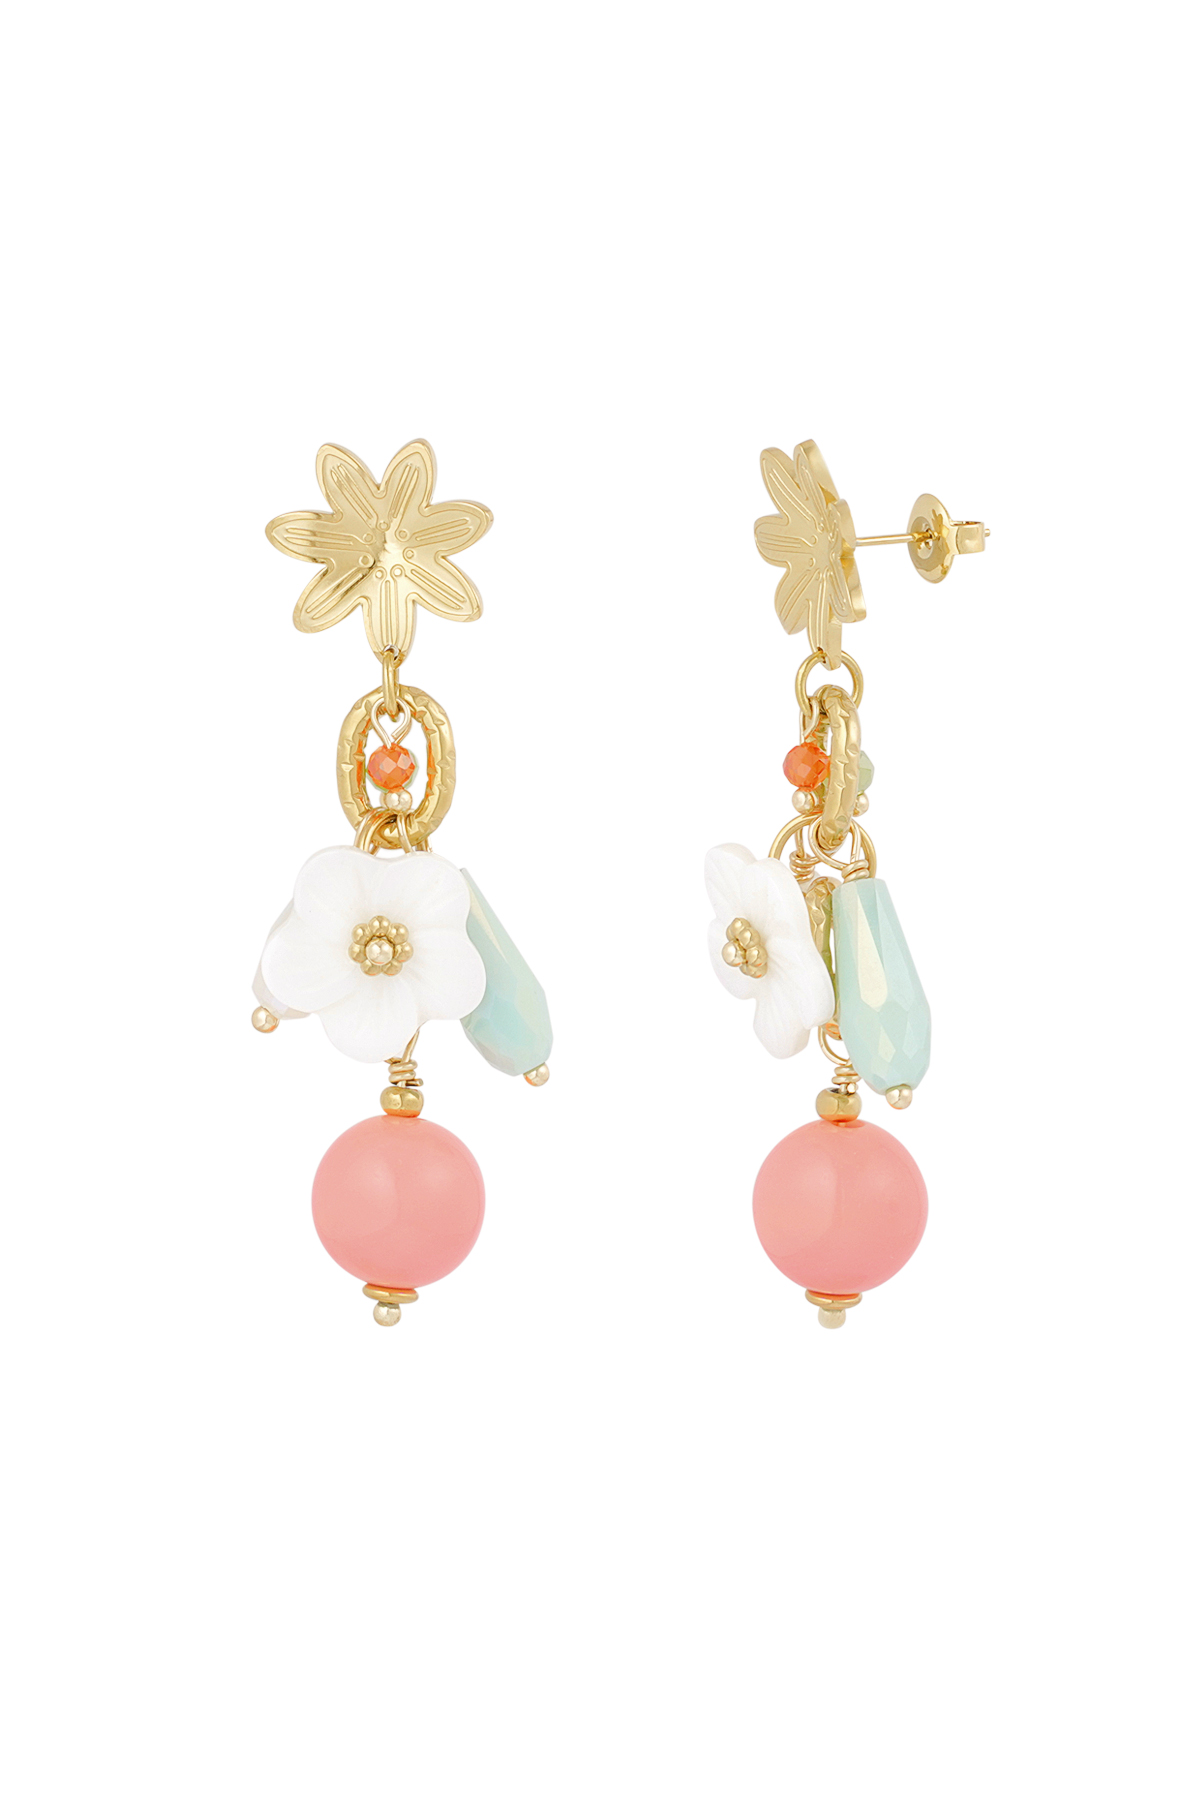 Earrings floral fusion - gold